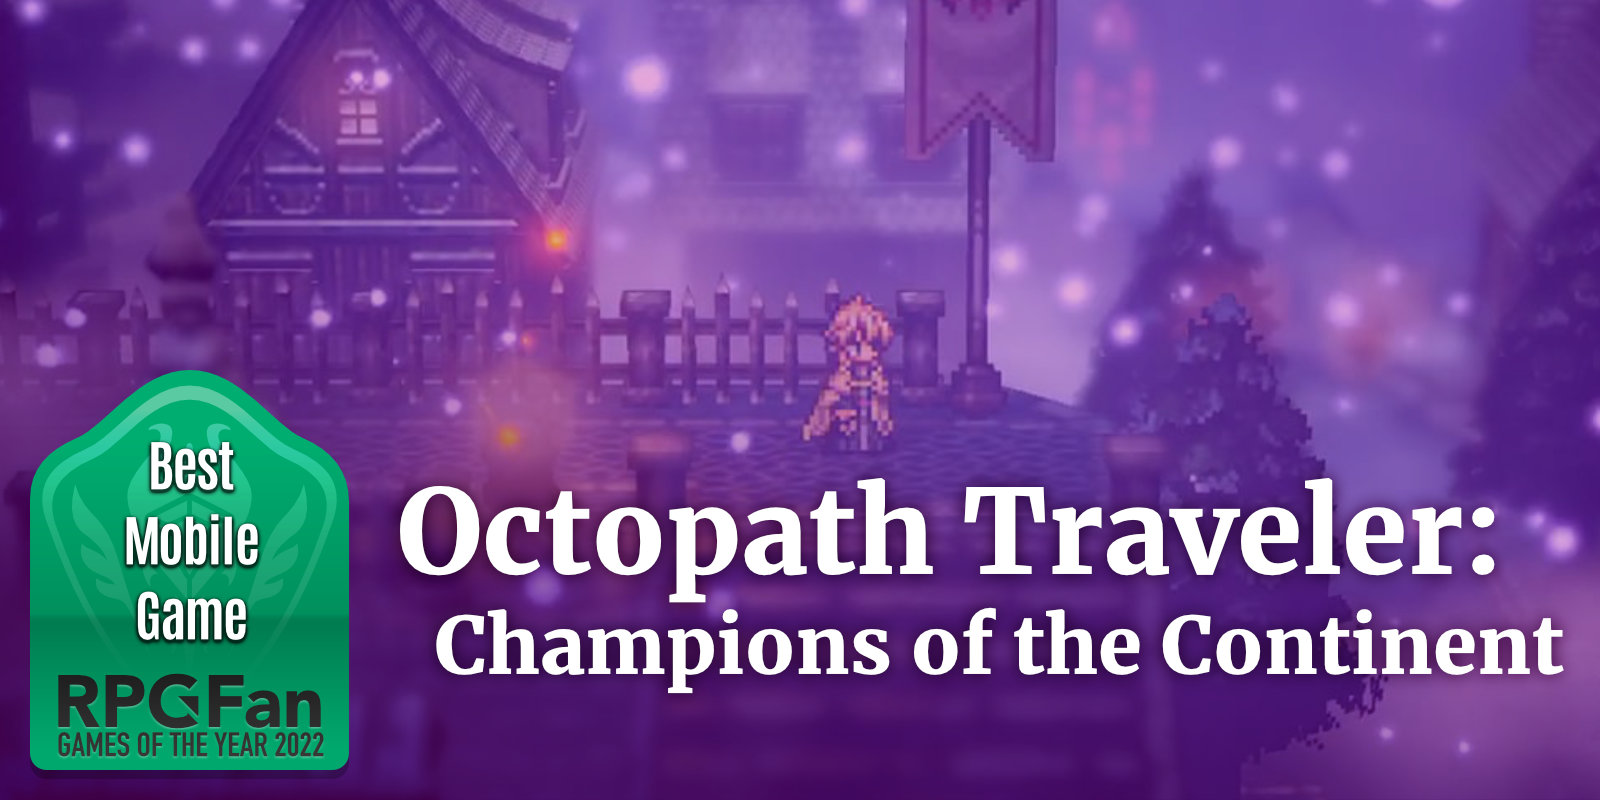 GOTY 2022 Best Mobile Game Octopath Traveler Champions of the Continent